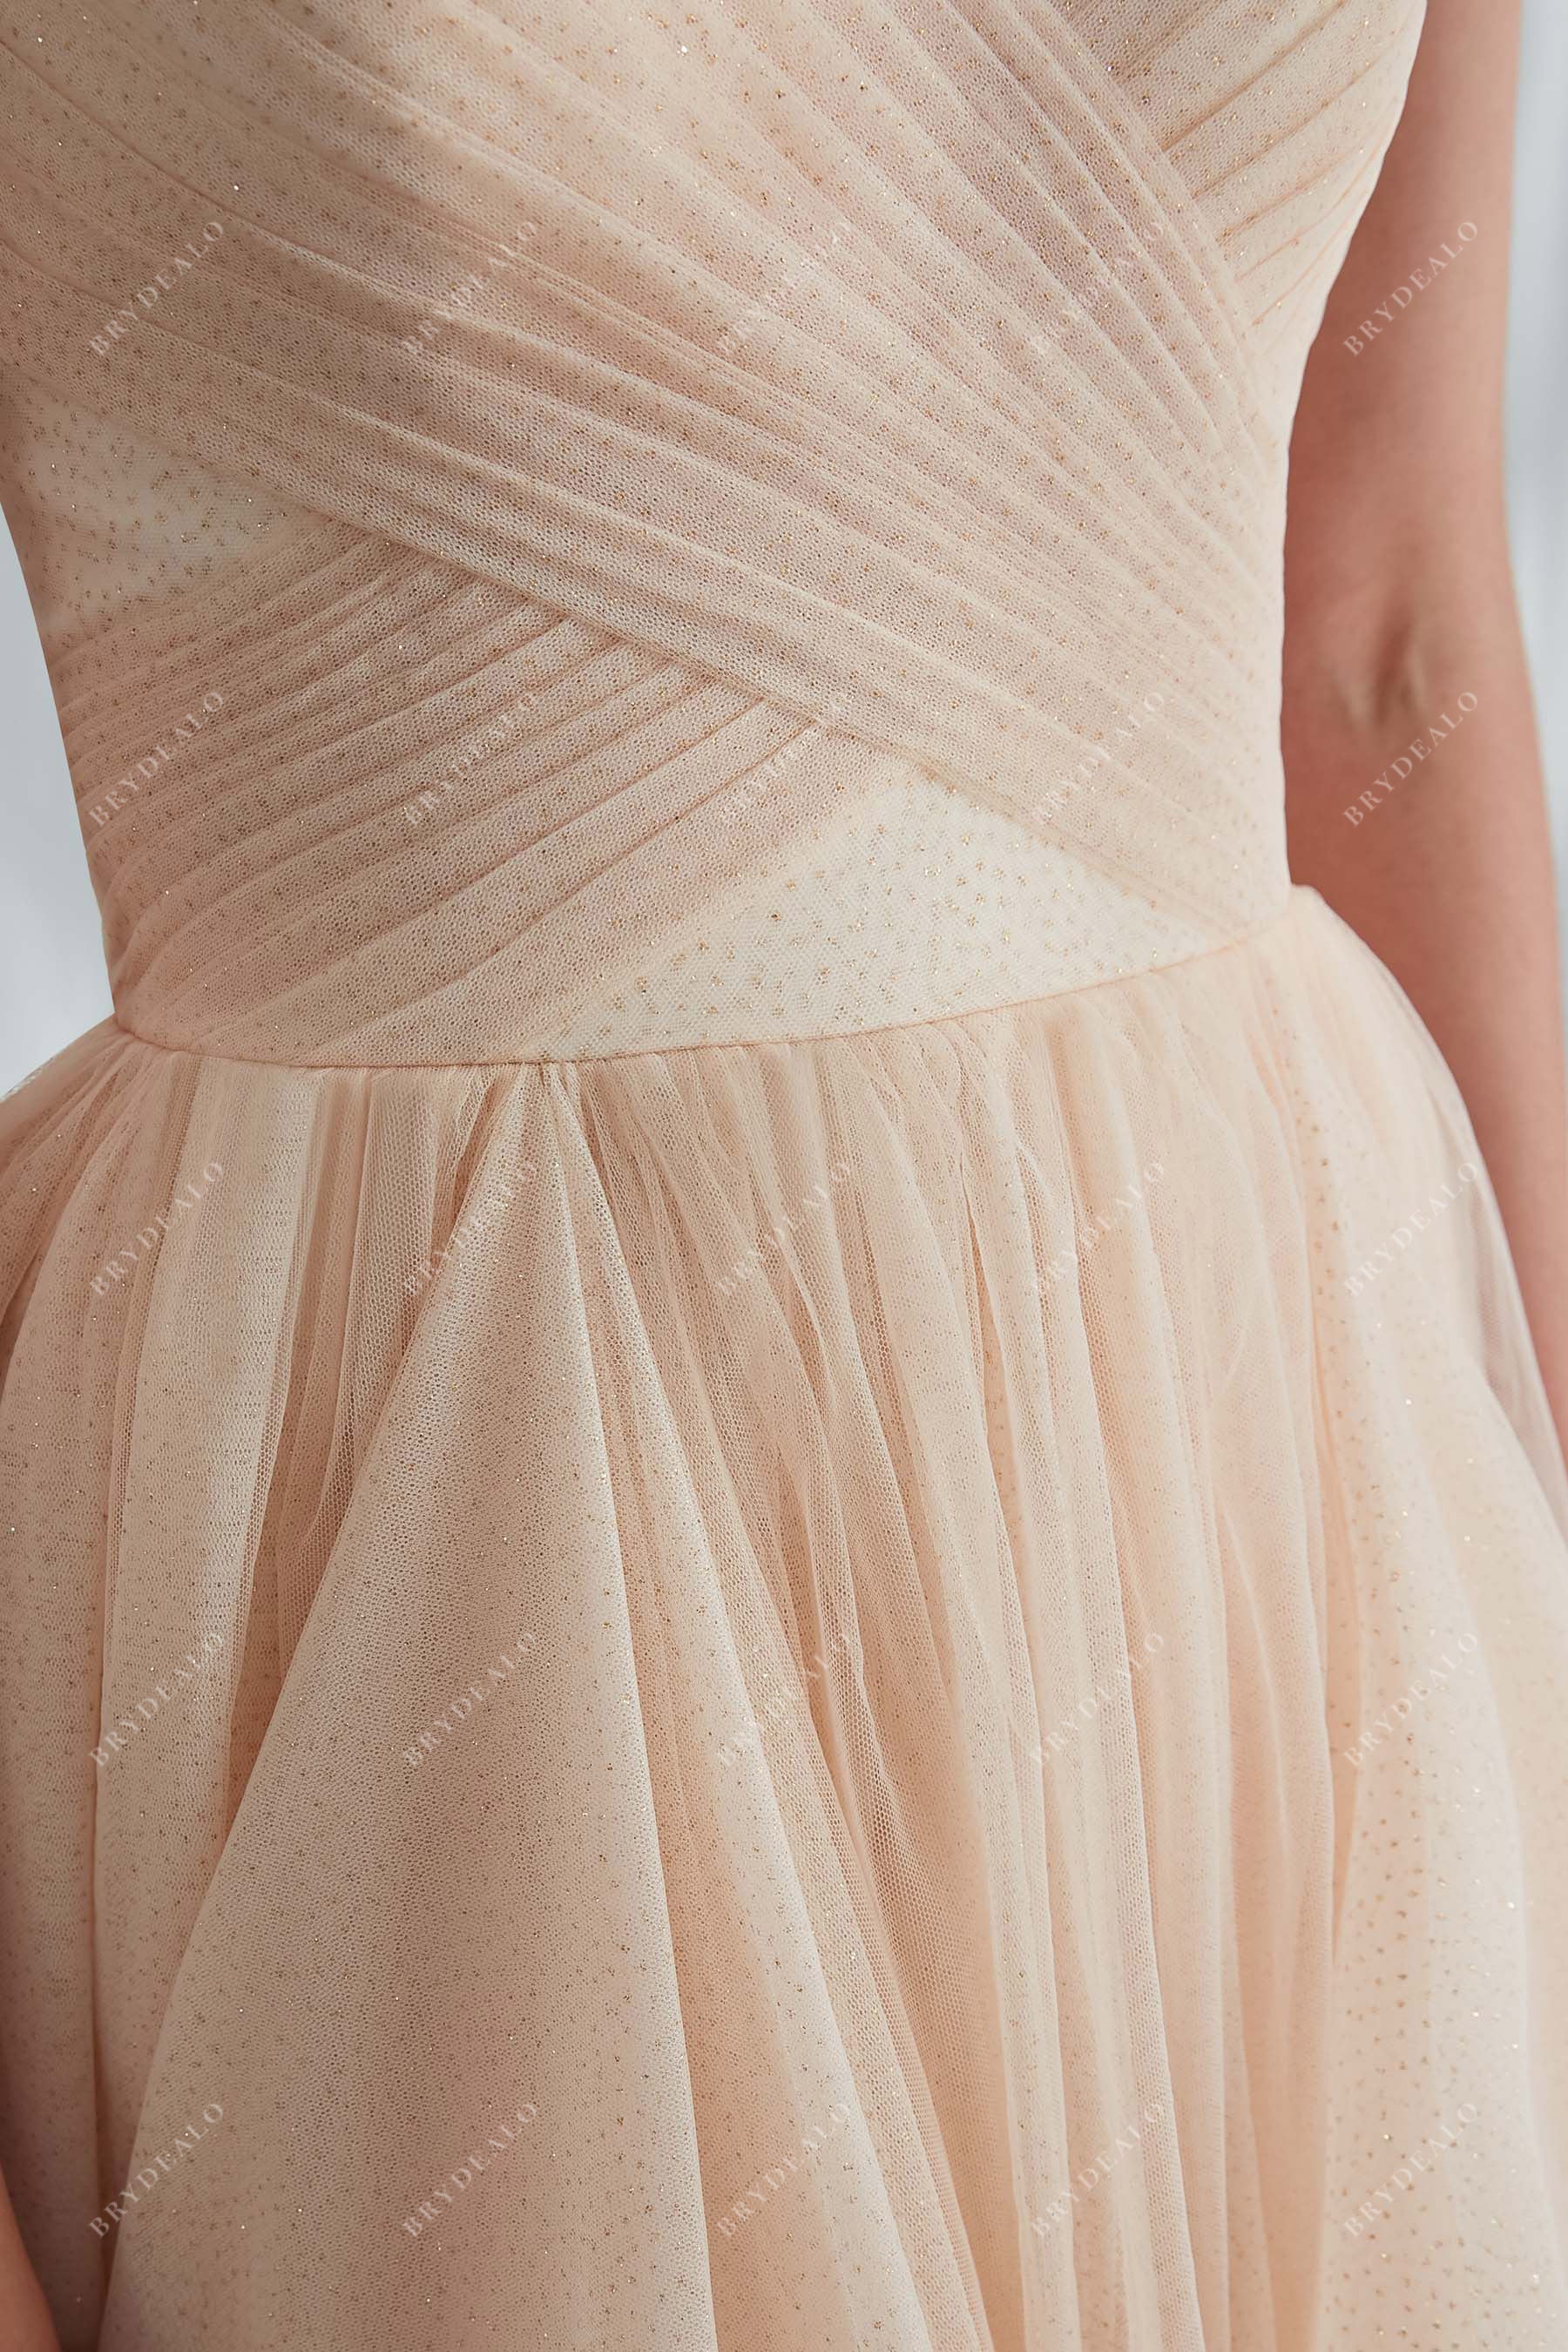 Shimmer Champagne Tulle Layered Wedding Ballgown Online